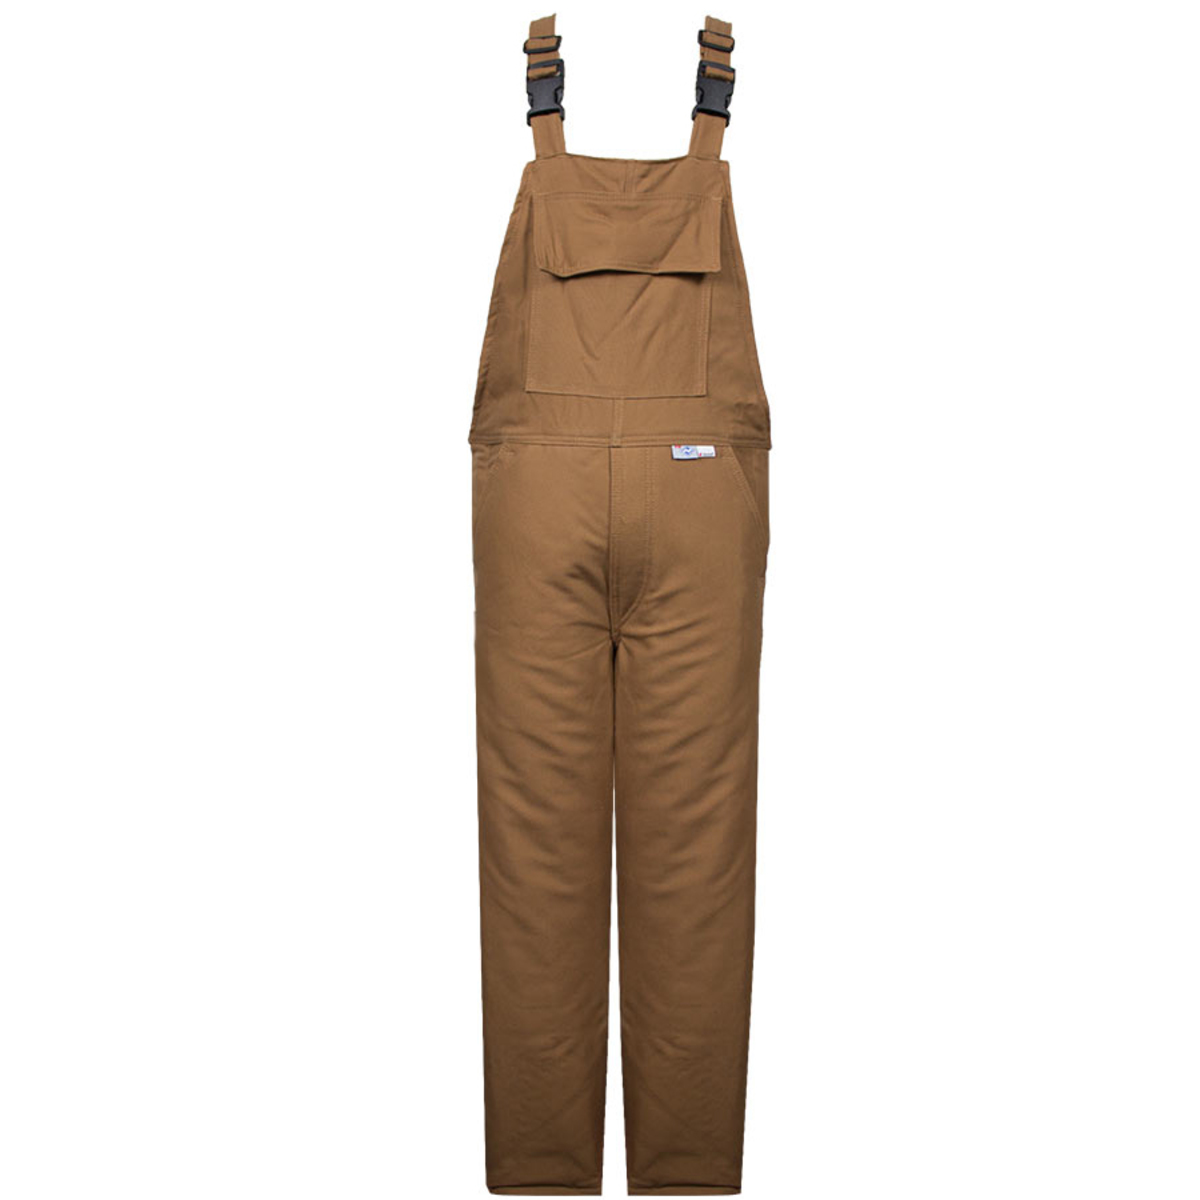 National Safety Apparel Medium Regular Brown Westex UltraSoft® Duck/DWR Flame Resistant Bib Overall FR Quilted Lining With Zippe